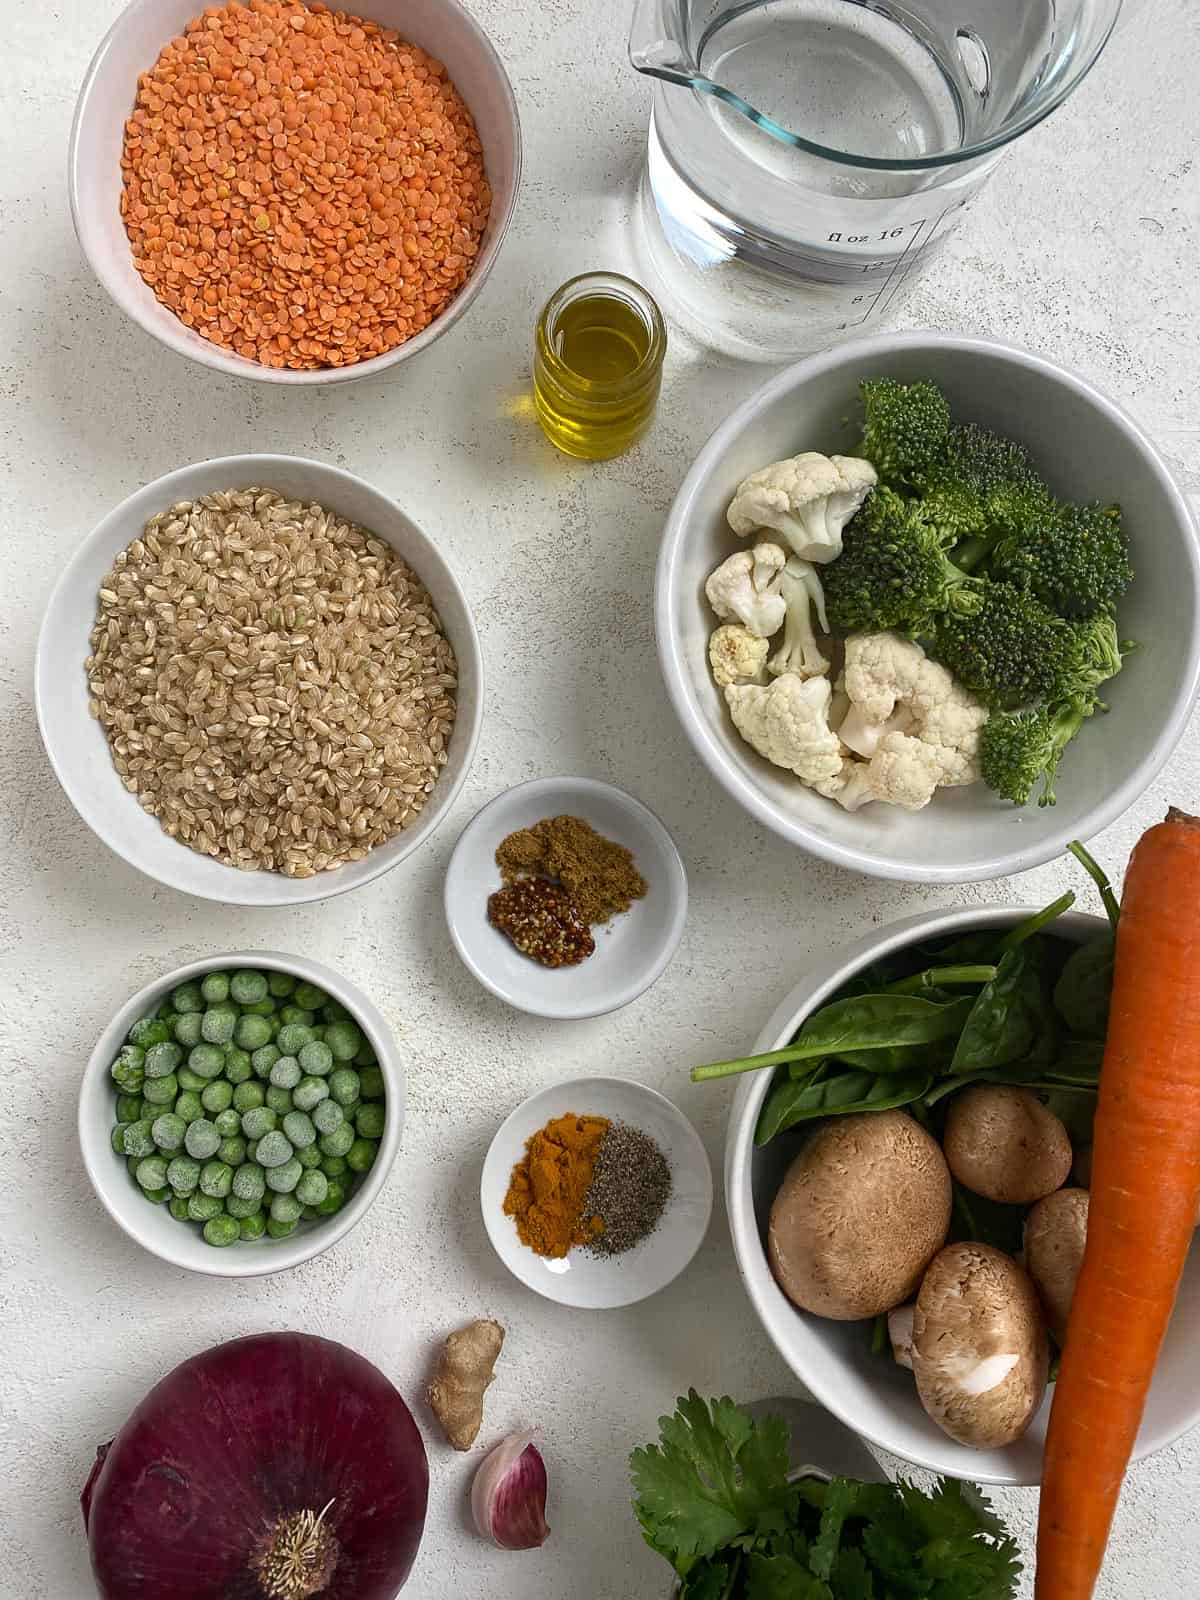 ingredients for Kichari Lentil Patties measured out against a white background